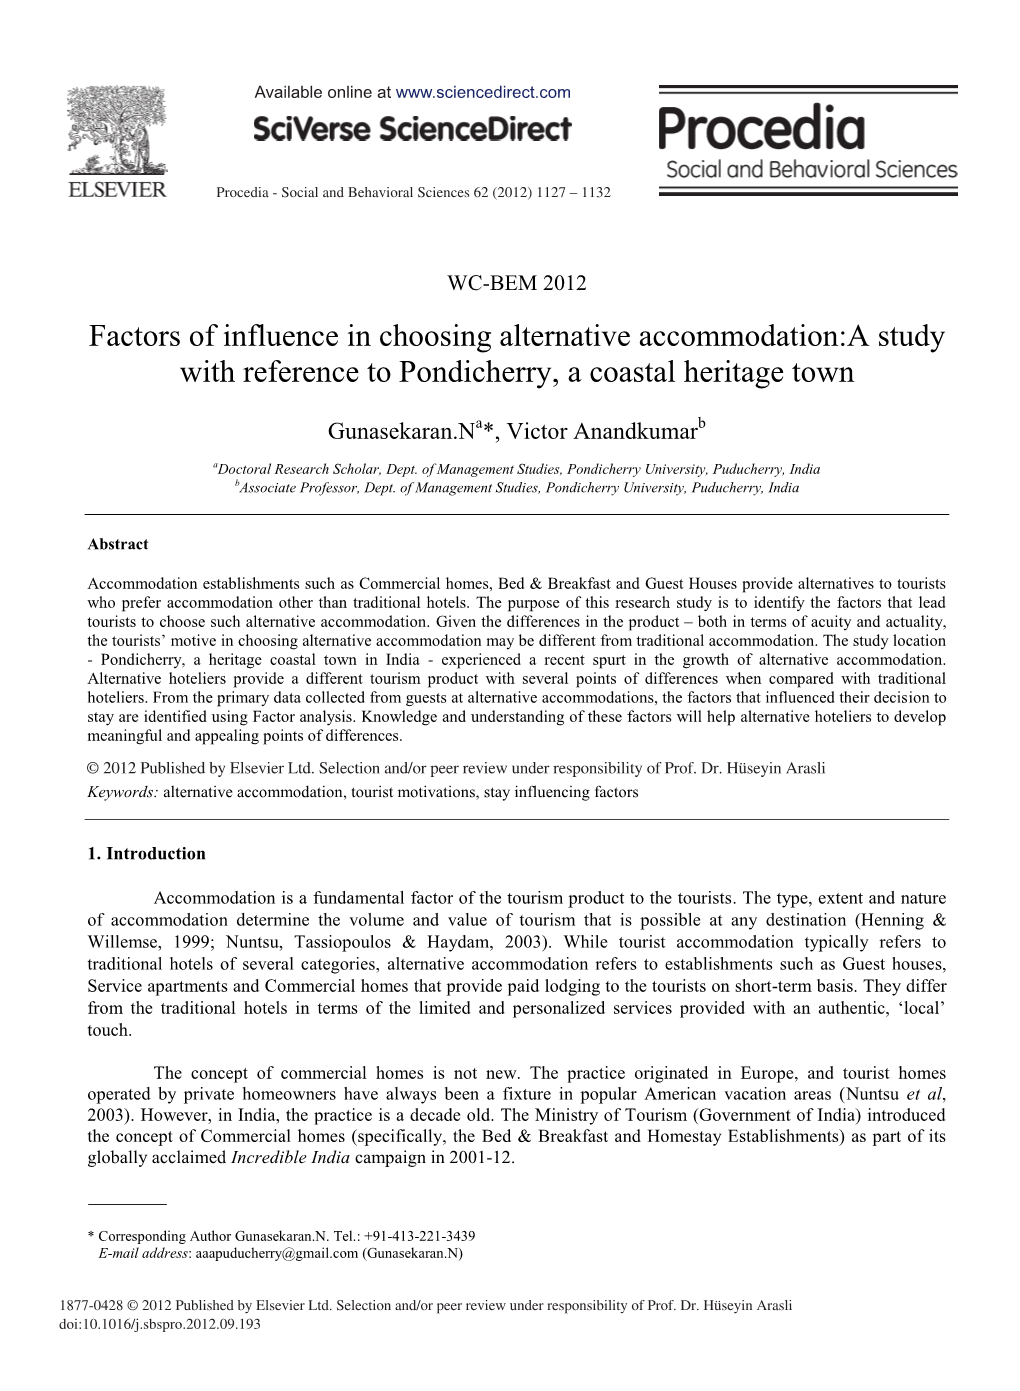 Factors of Influence in Choosing Alternative Accommodation:A Study with Reference to Pondicherry, a Coastal Heritage Town